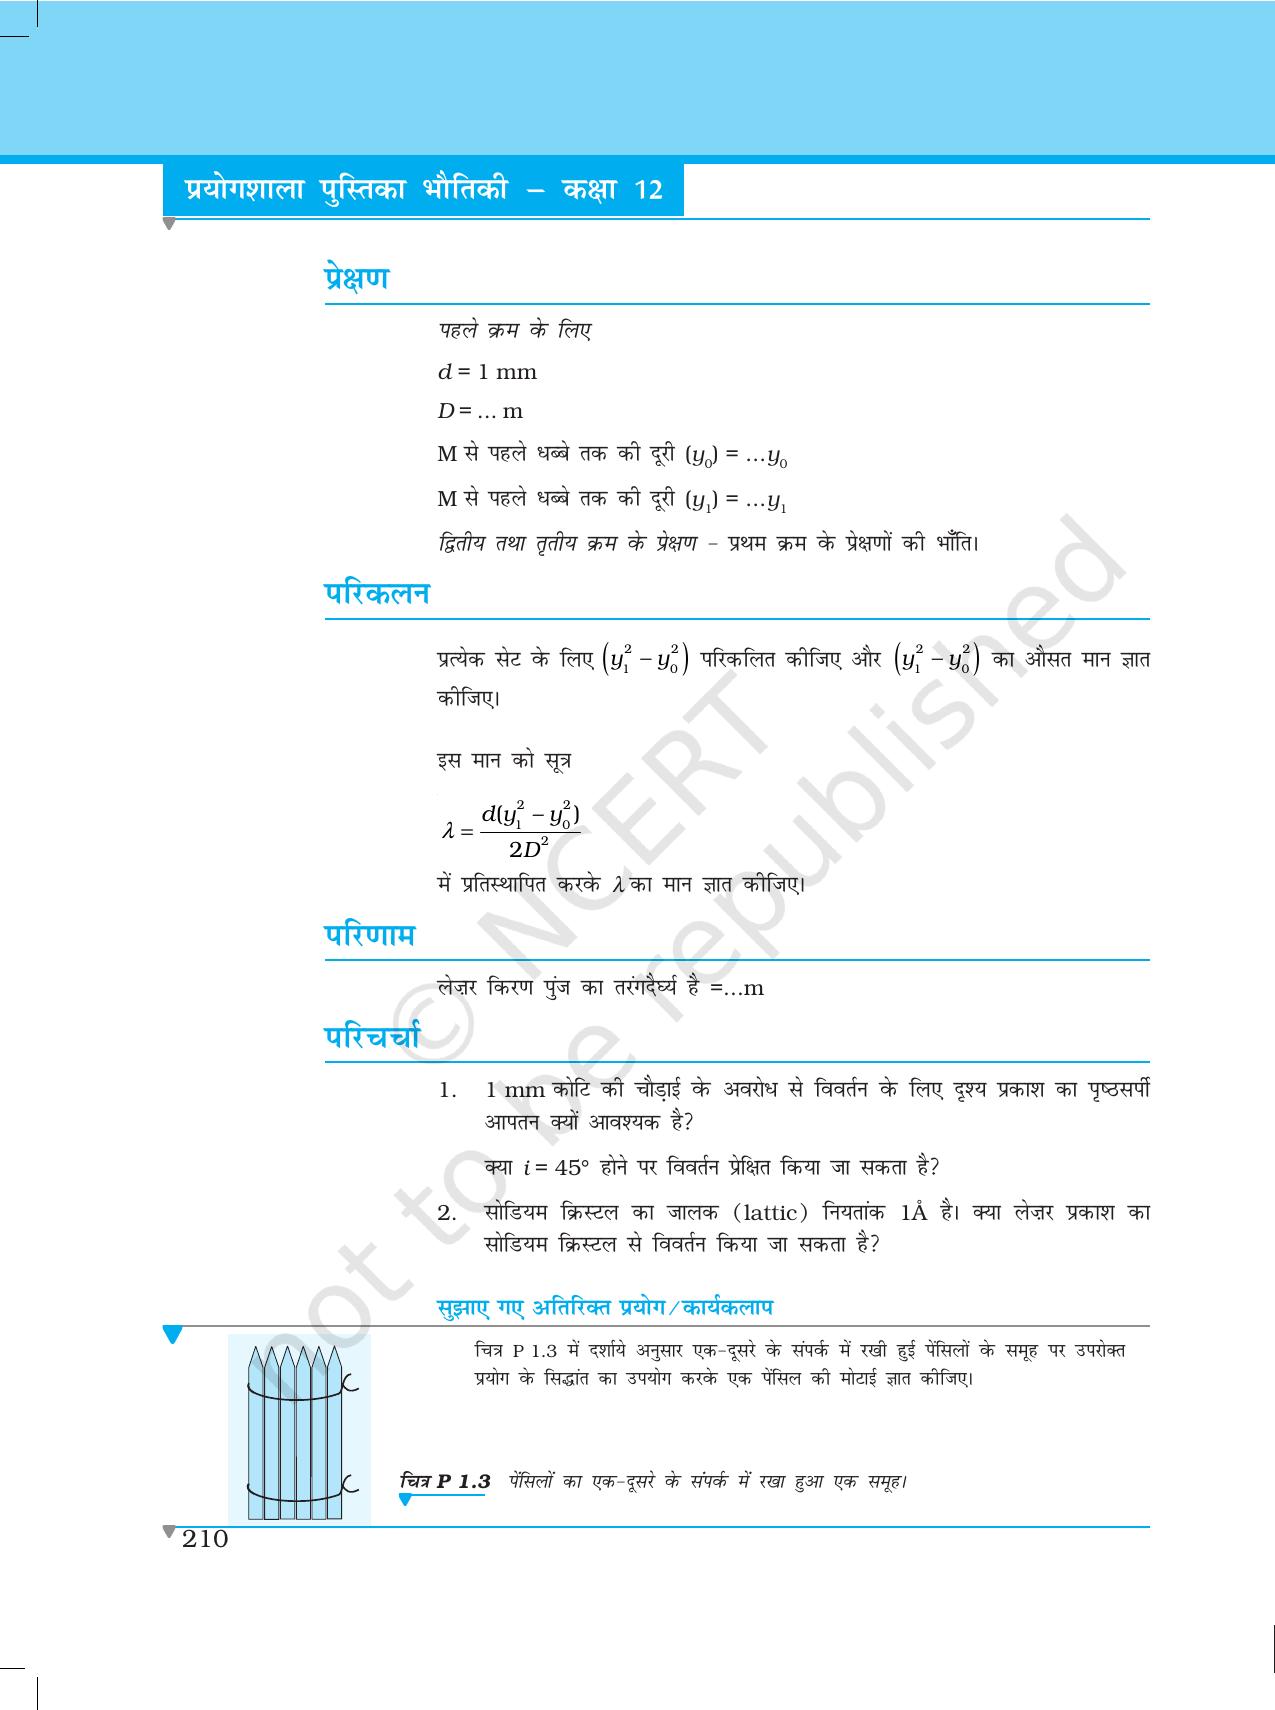 NCERT Laboratory Manuals for Class XII भौतिकी - परियोजना (1 - 7) - Page 4